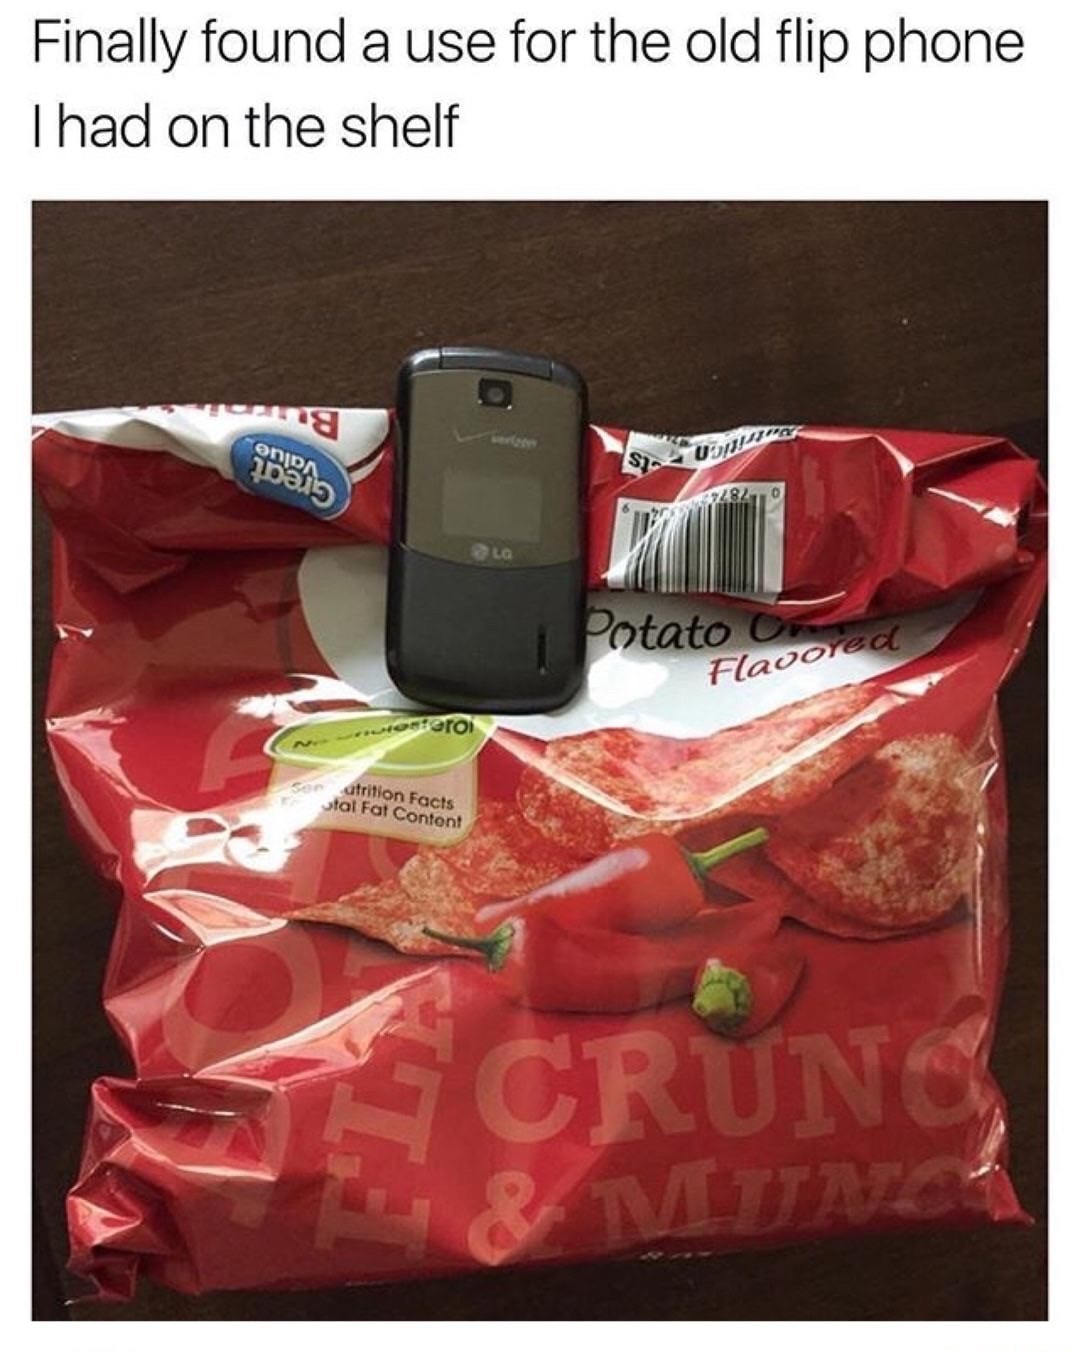 dank meme Joke - Finally found a use for the old flip phone Thad on the shelf 18 among 12820 Potato Of Flavored osteroi utrition Facts stal Fat Contont